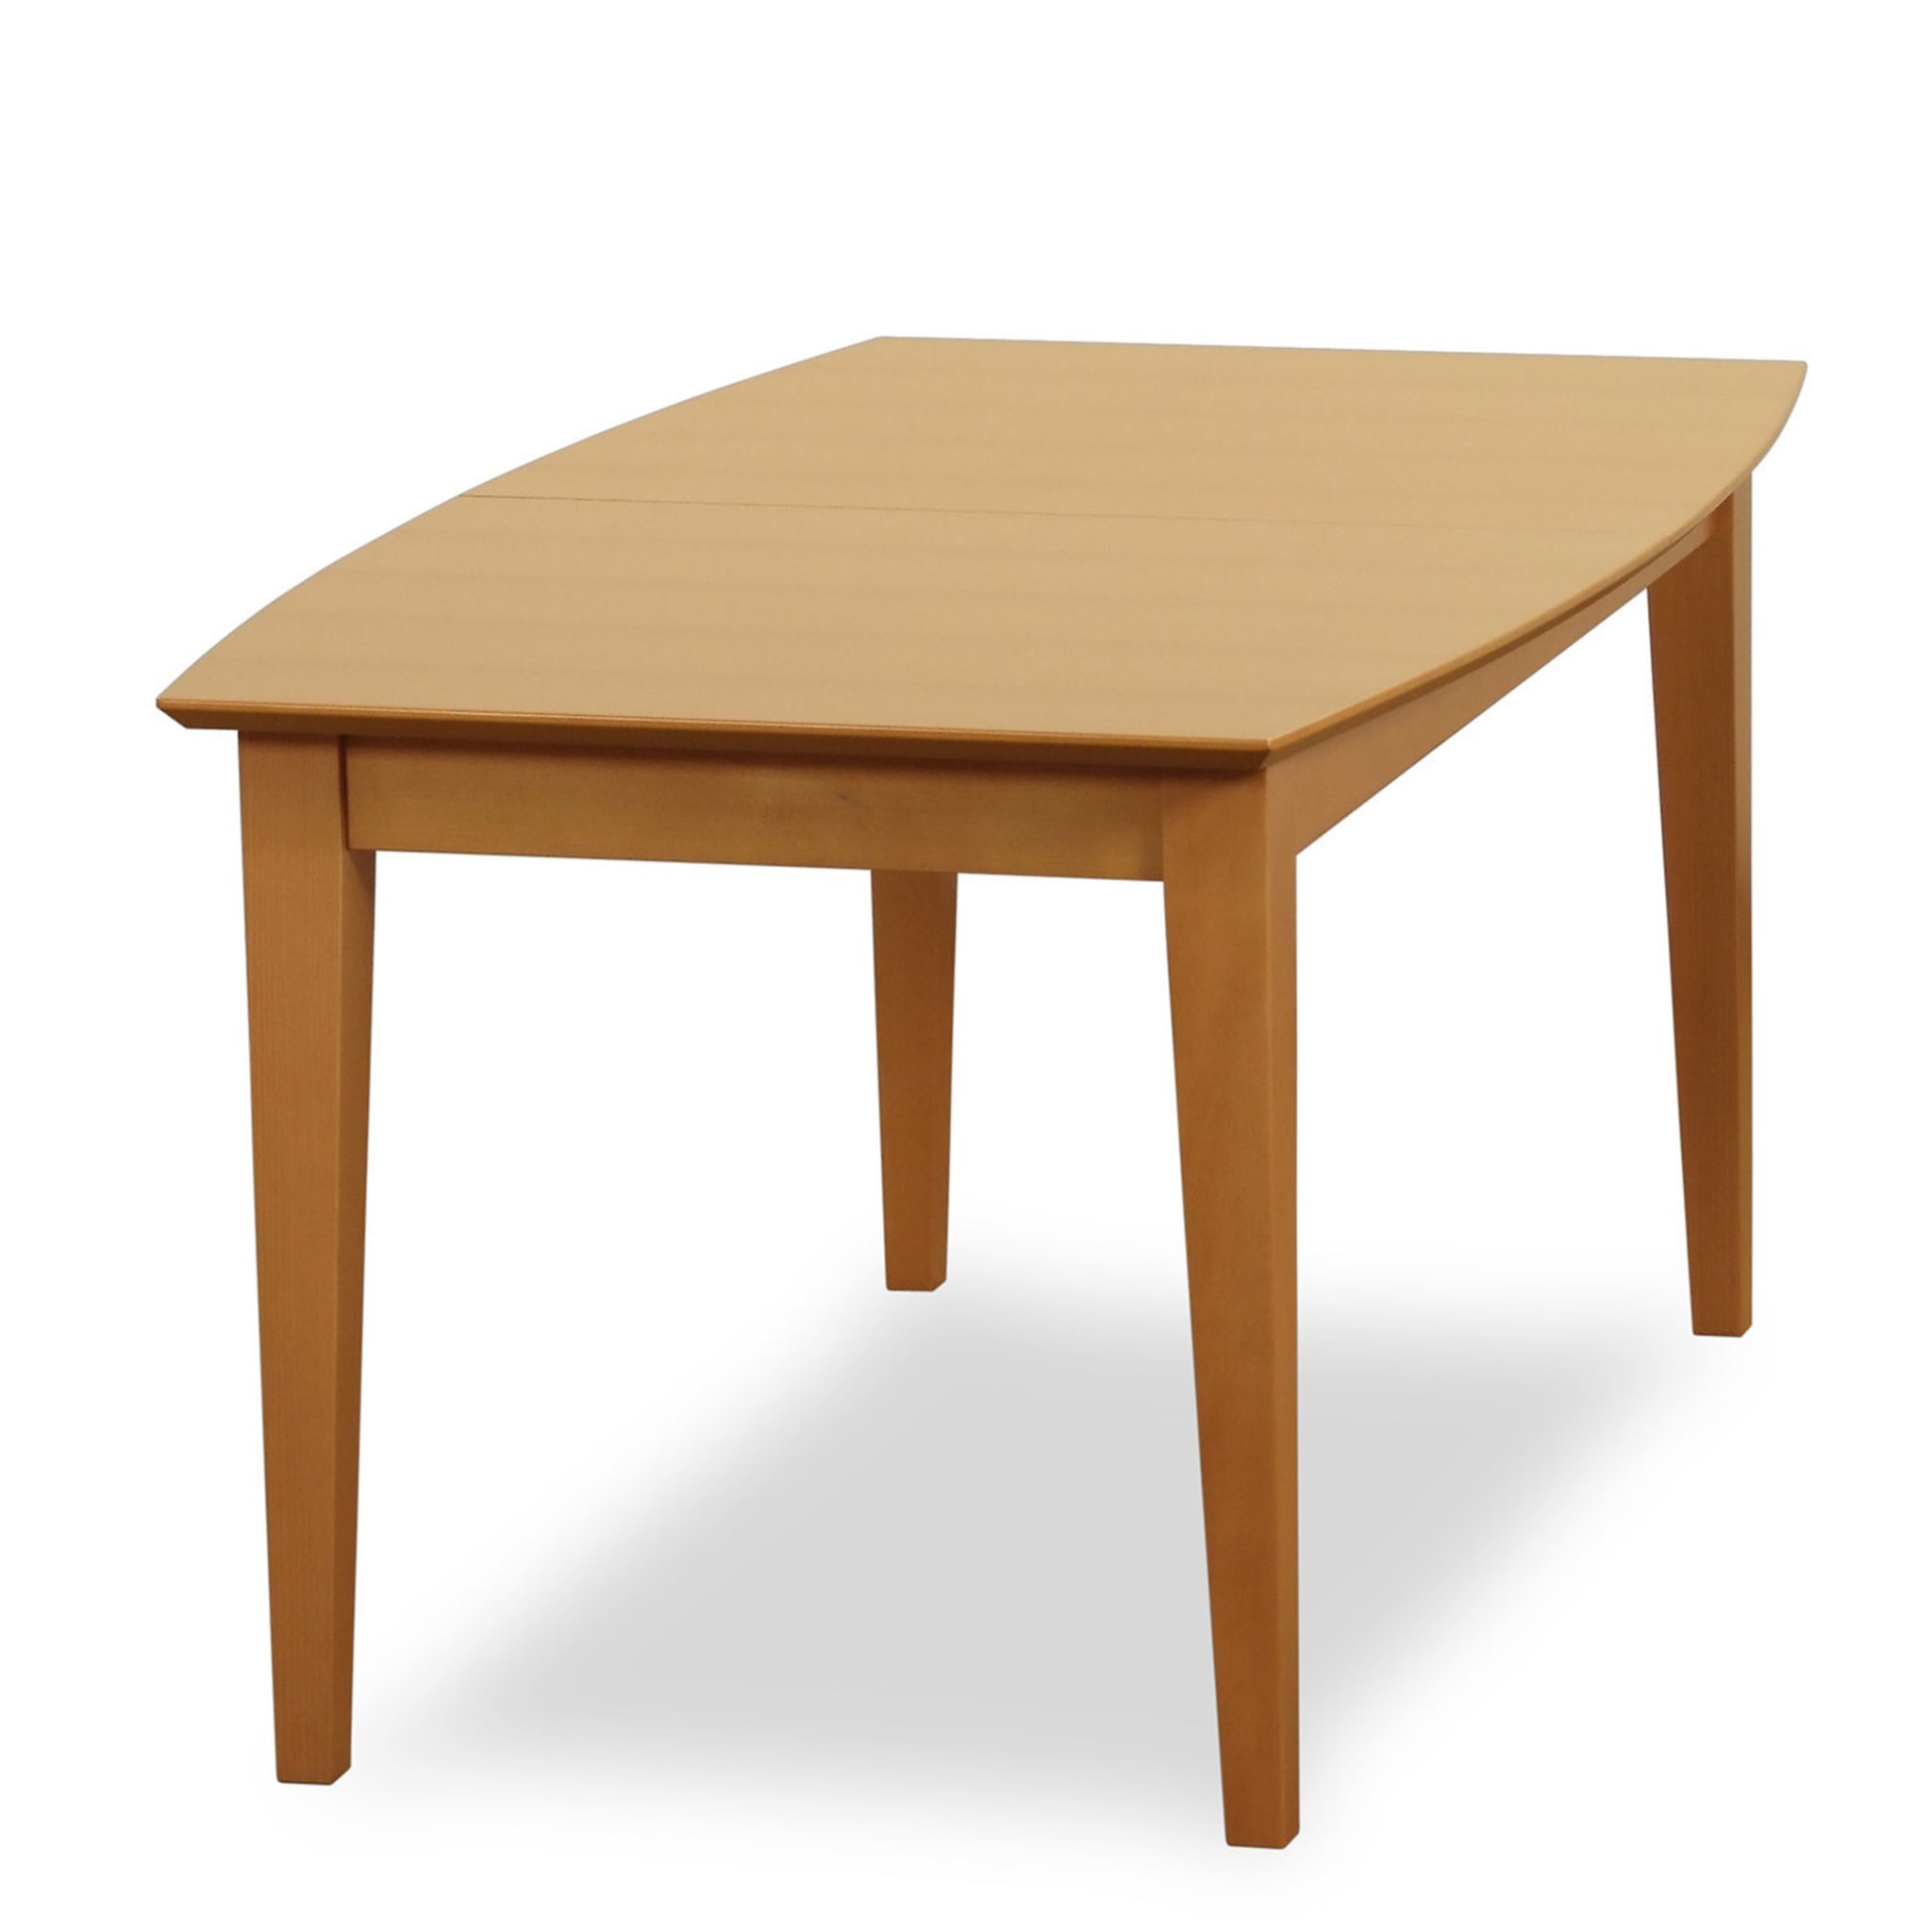 640/35 Extendable Dining Table - Alternative view 3